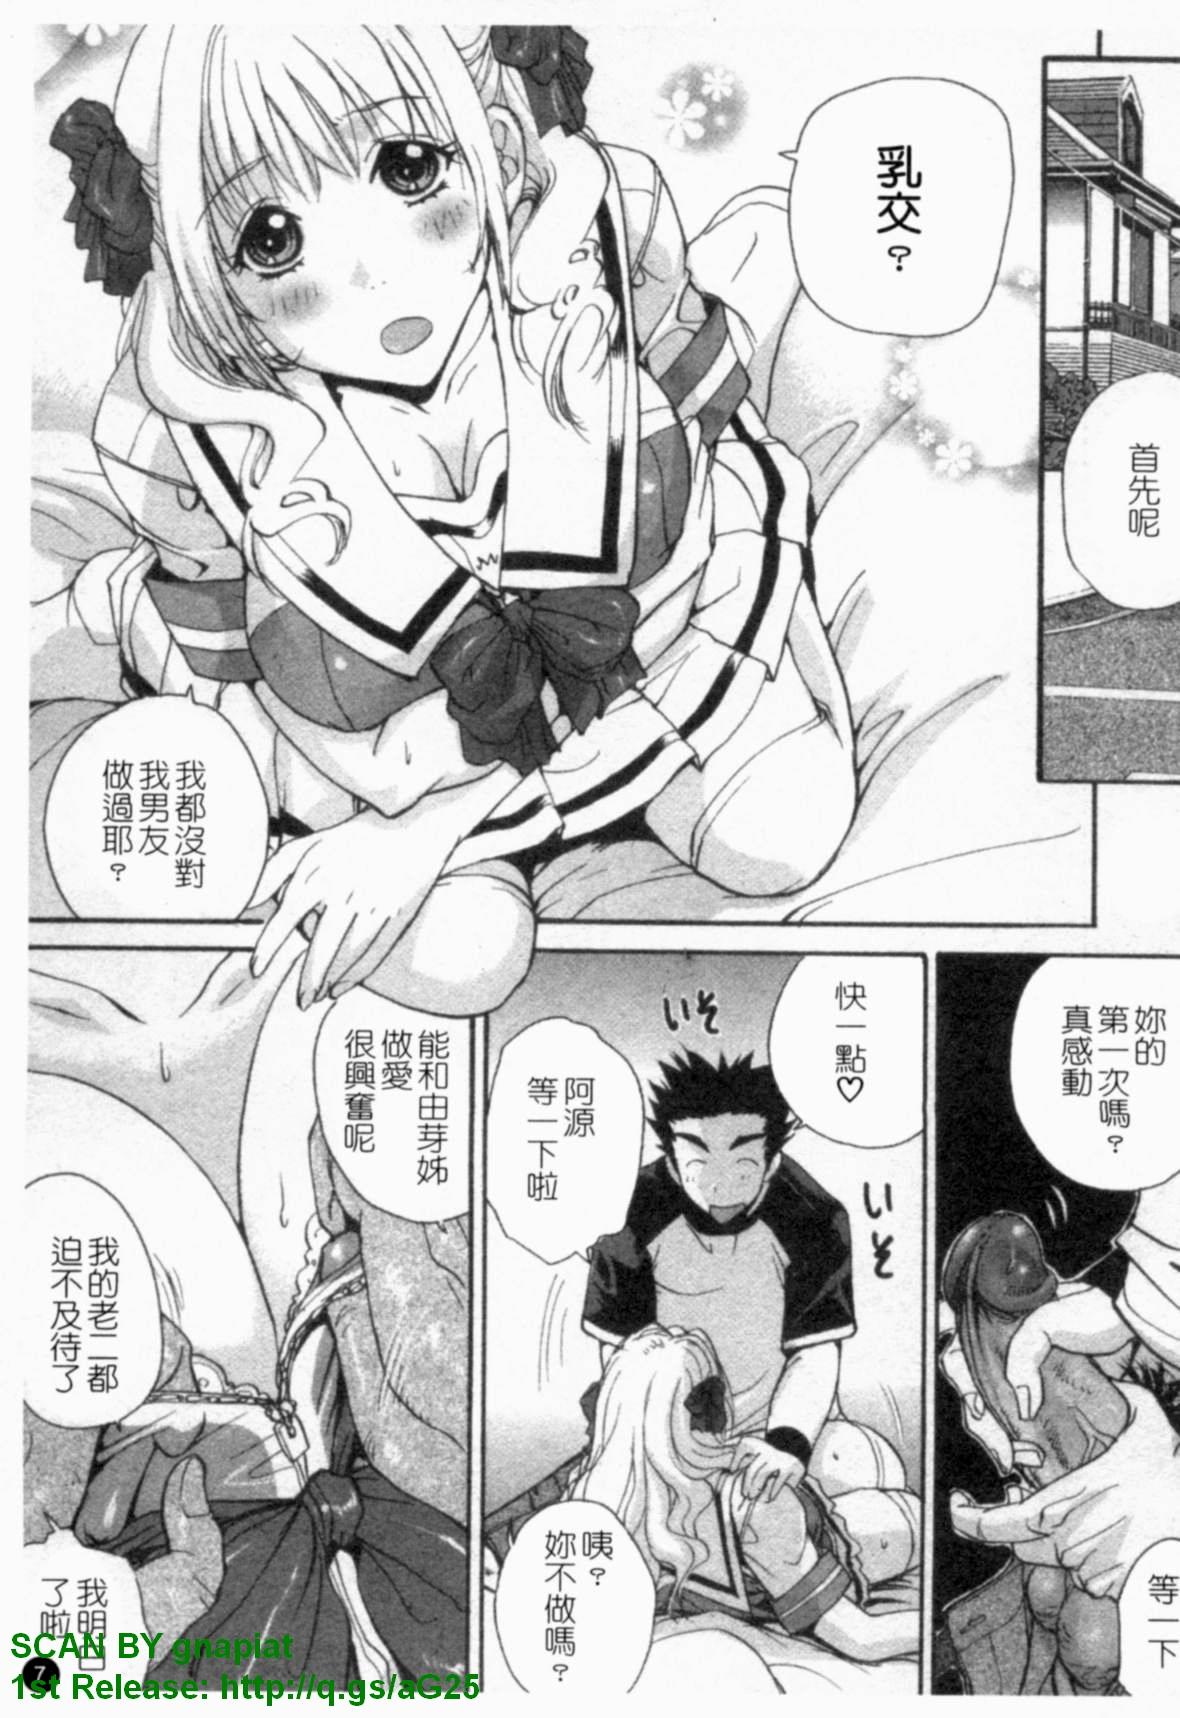 Hot Blow Jobs Ane ☆ Fes | 鄰家大姊姊 Argentino - Page 8